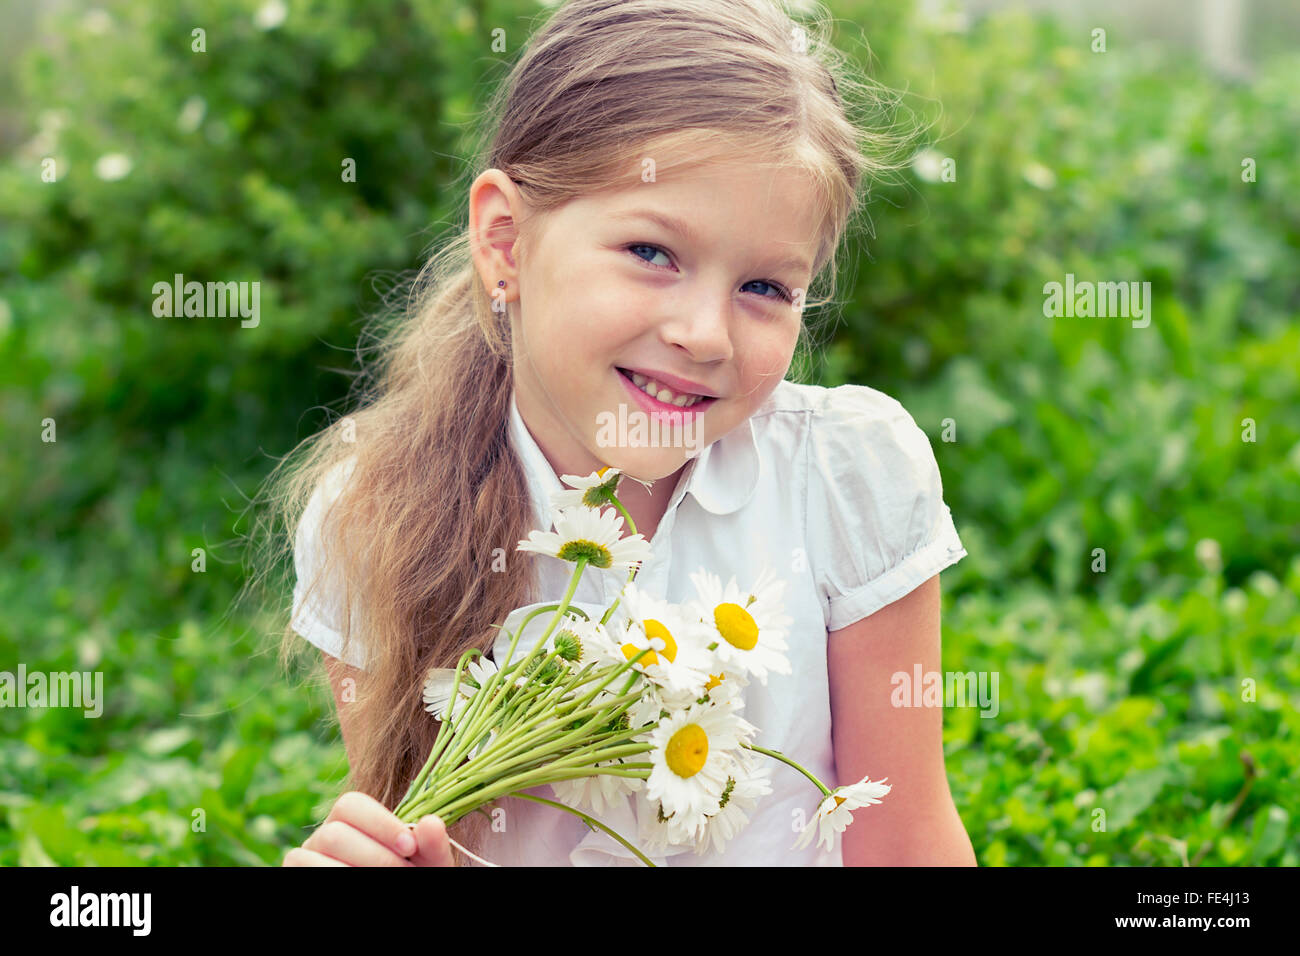 Cute smiling girl with a bouquet of daisies on green background Stock Photo